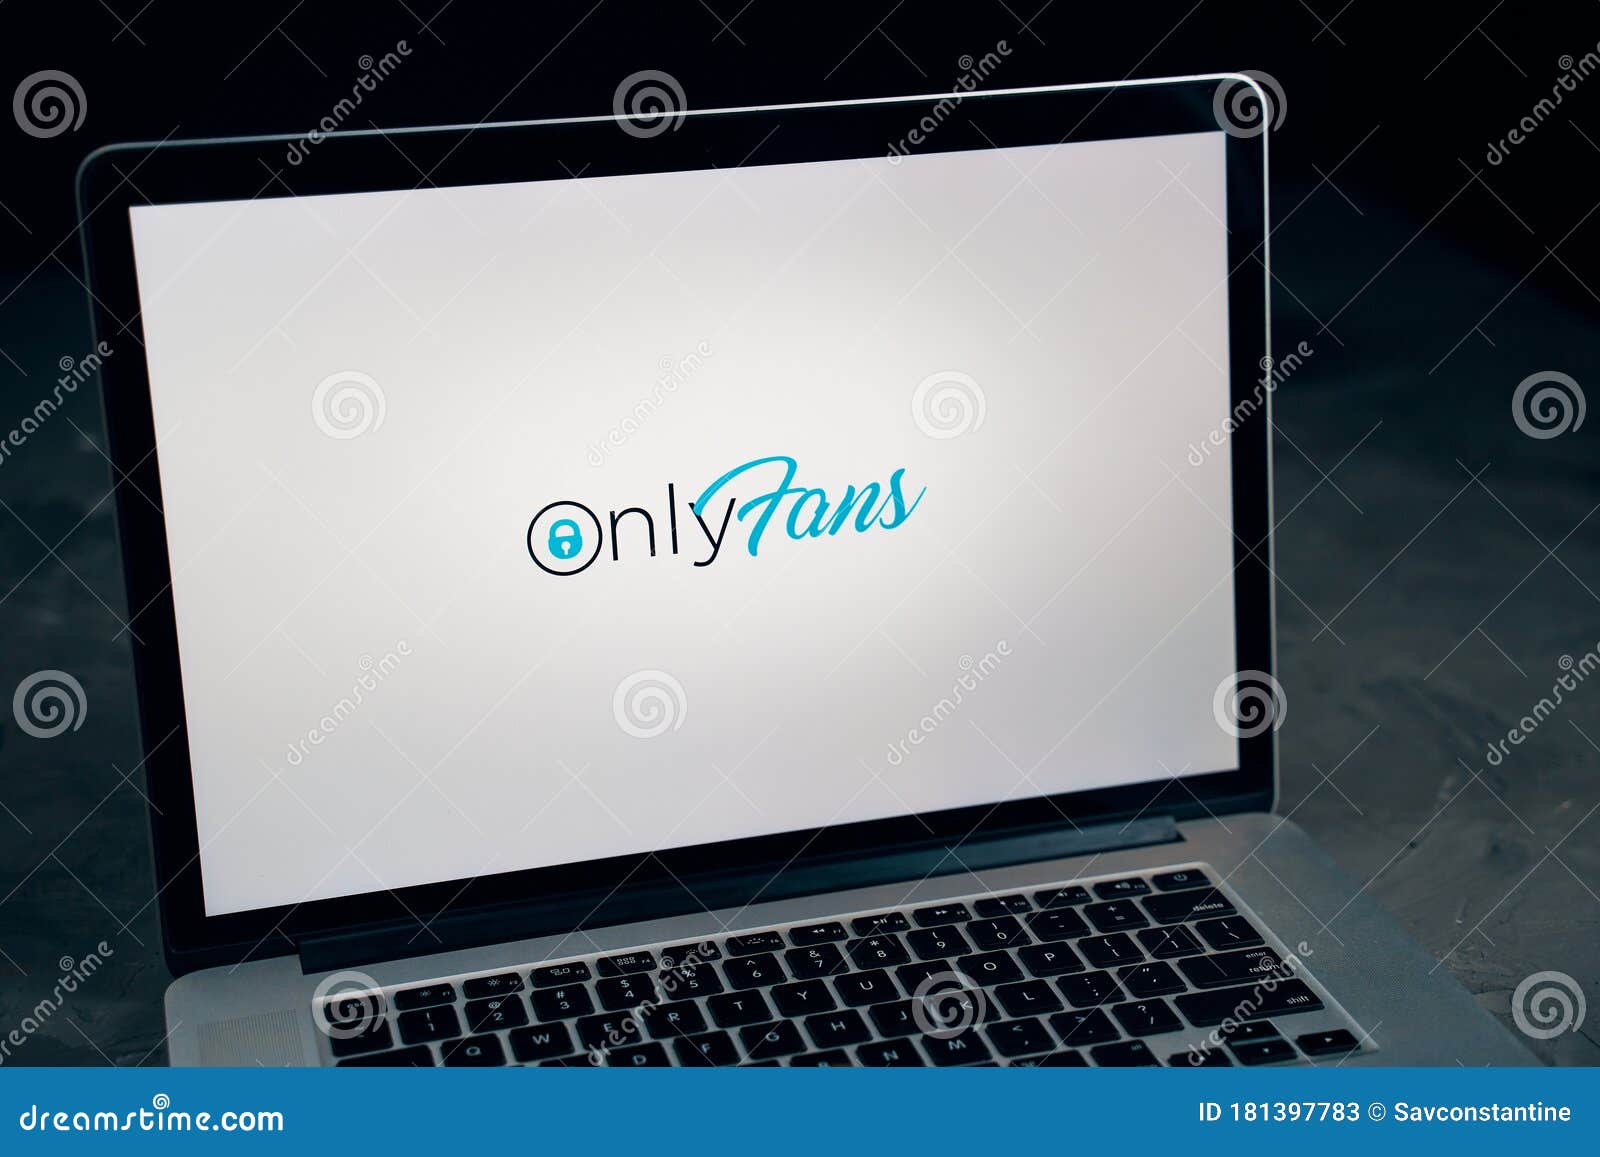 How to preview onlyfans